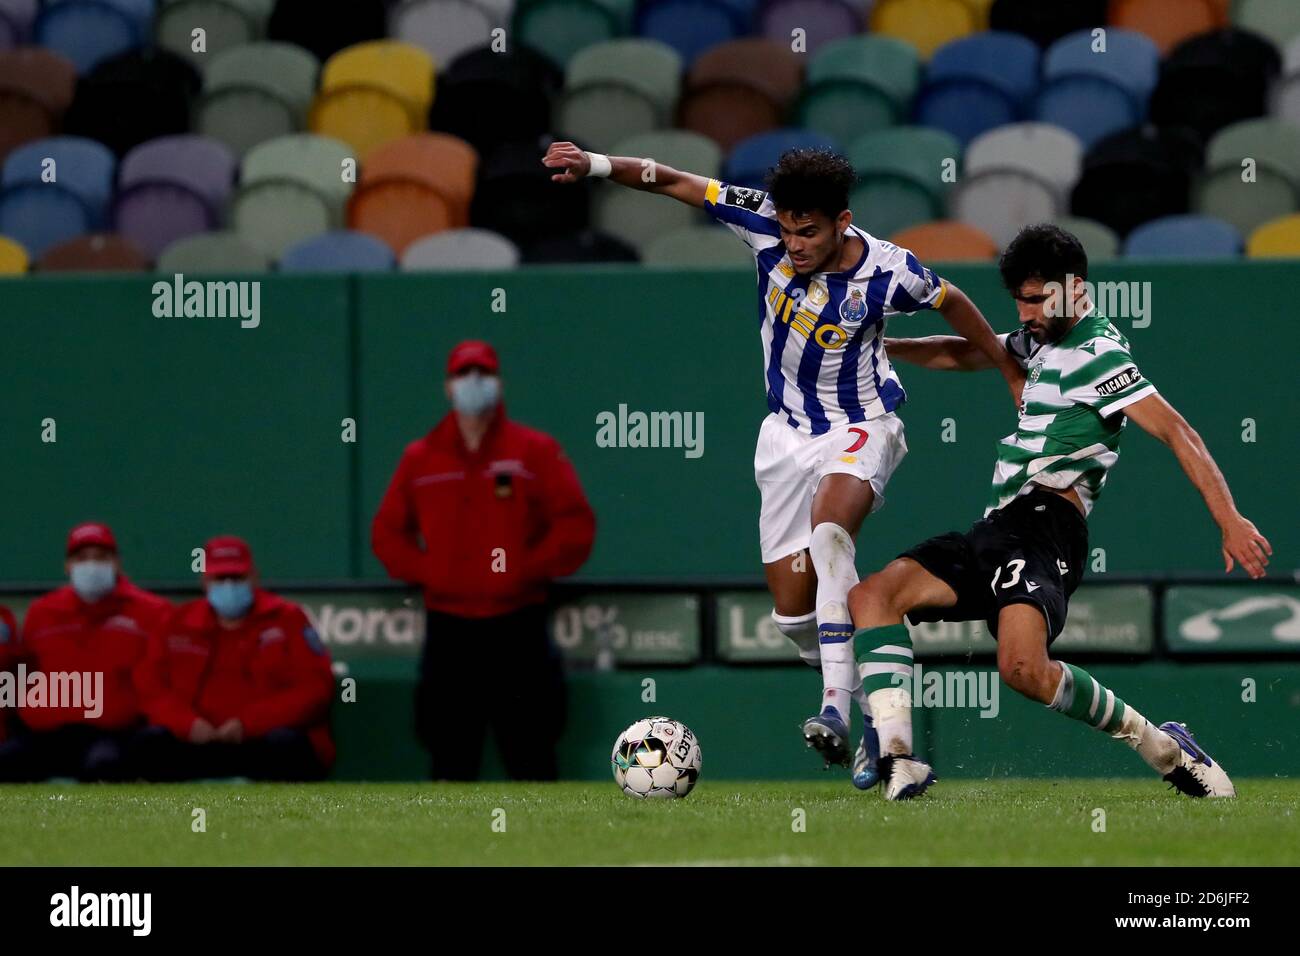 Lisbon, Portugal. 17th Oct, 2020. Luis Diaz of FC Porto (L) vies with Luis Neto of Sporting CP during the Portuguese League football match between Sporting CP and FC Porto at Jose Alvalade stadium in Lisbon, Portugal on October 17, 2020. Credit: Pedro Fiuza/ZUMA Wire/Alamy Live News Stock Photo